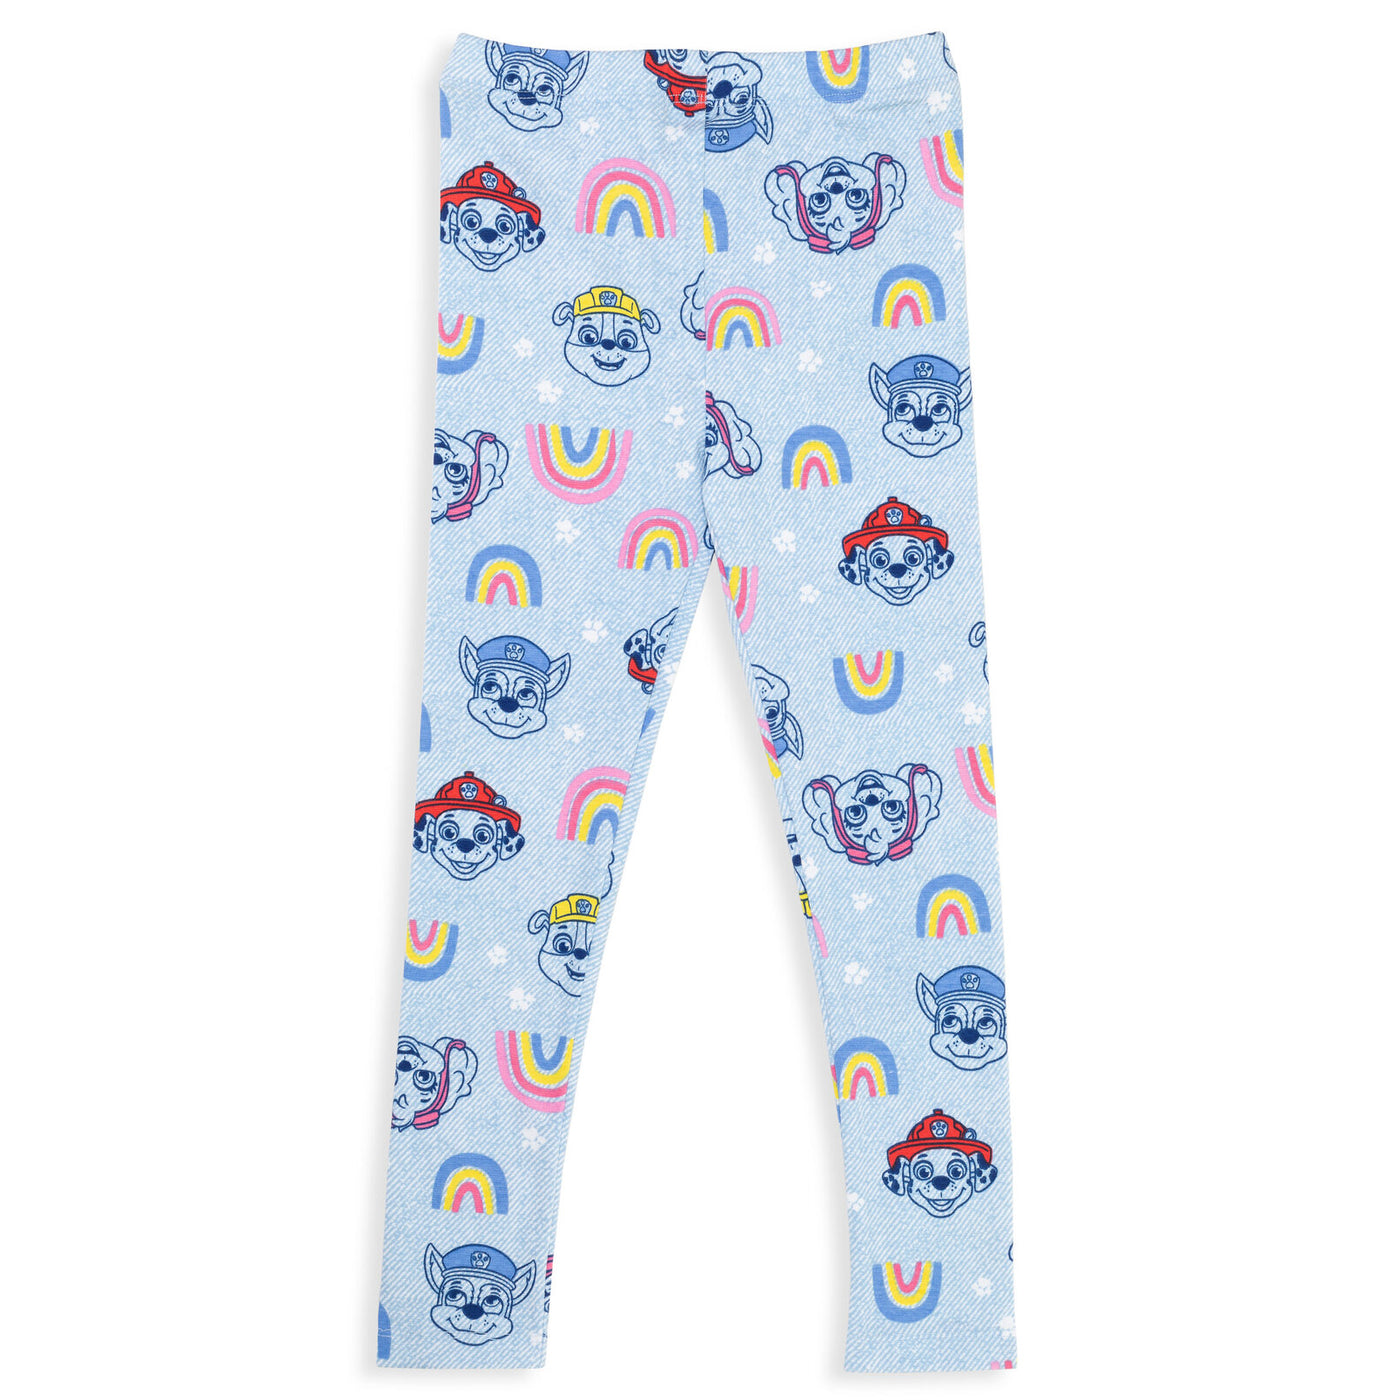 Paw Patrol T-Shirt and Leggings Outfit Set